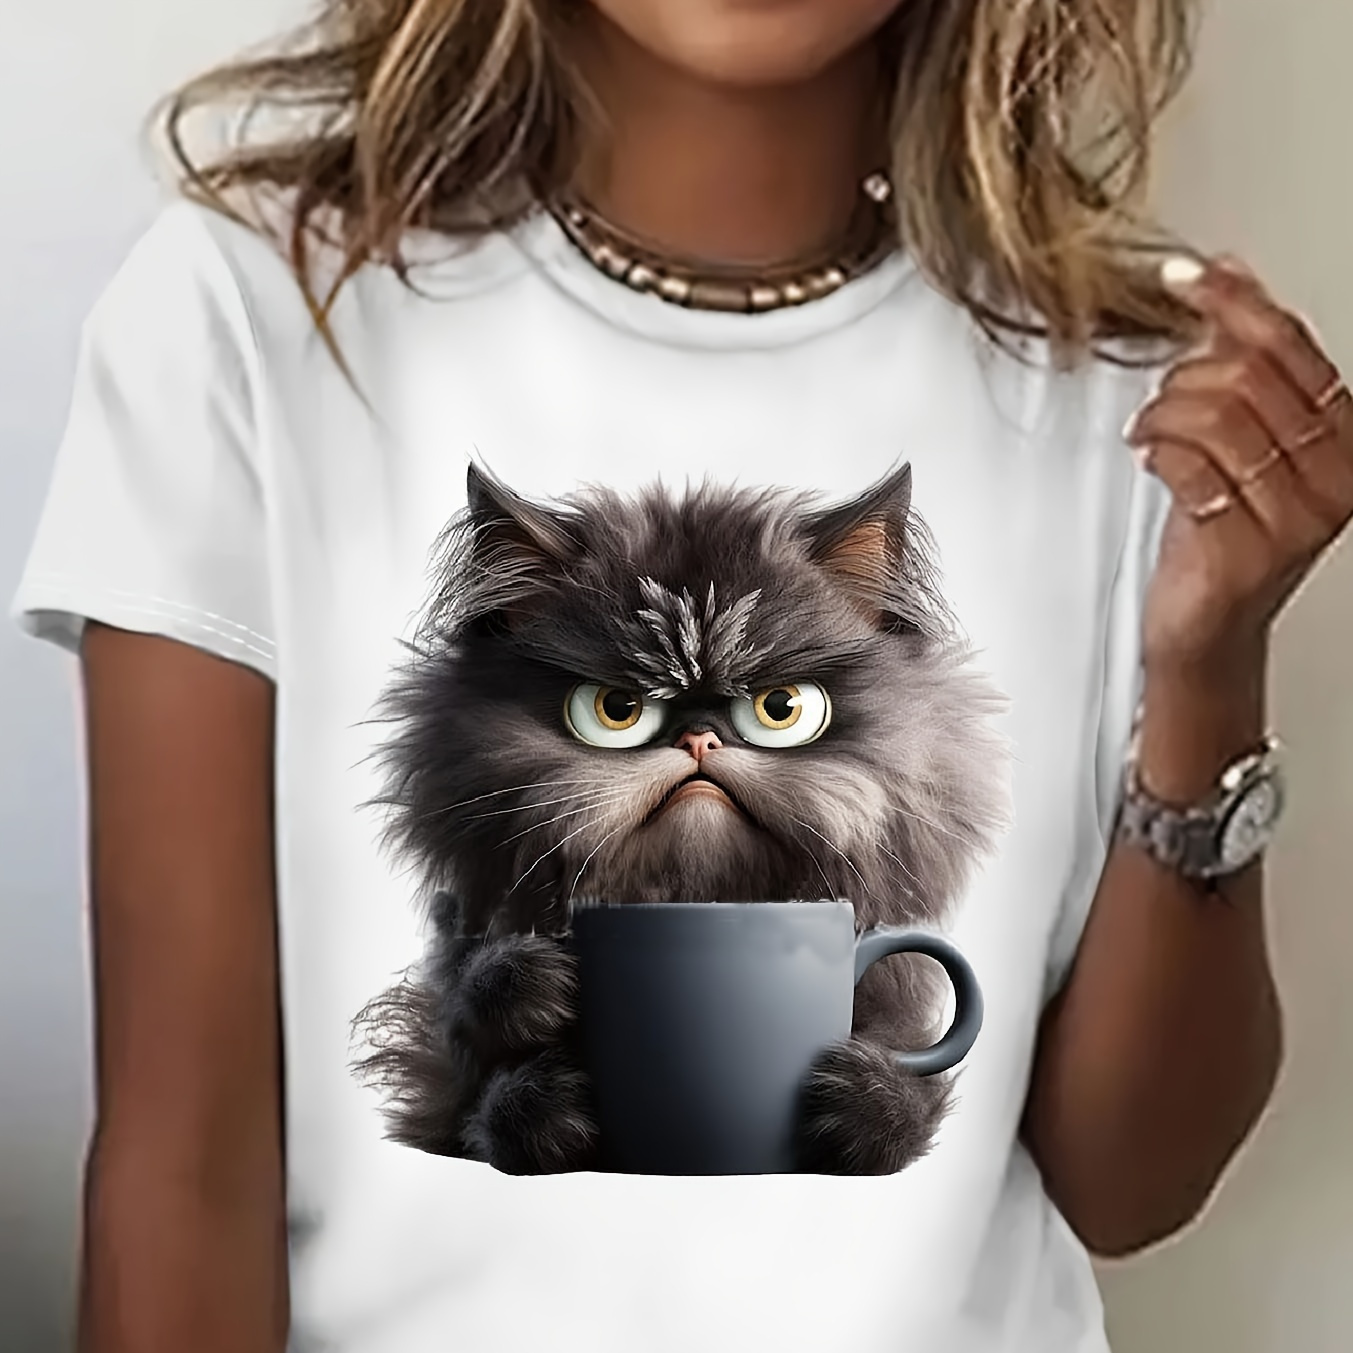 

Cat Print T-shirt, Short Sleeve Crew Neck Casual Top For Summer & Spring, Women's Clothing